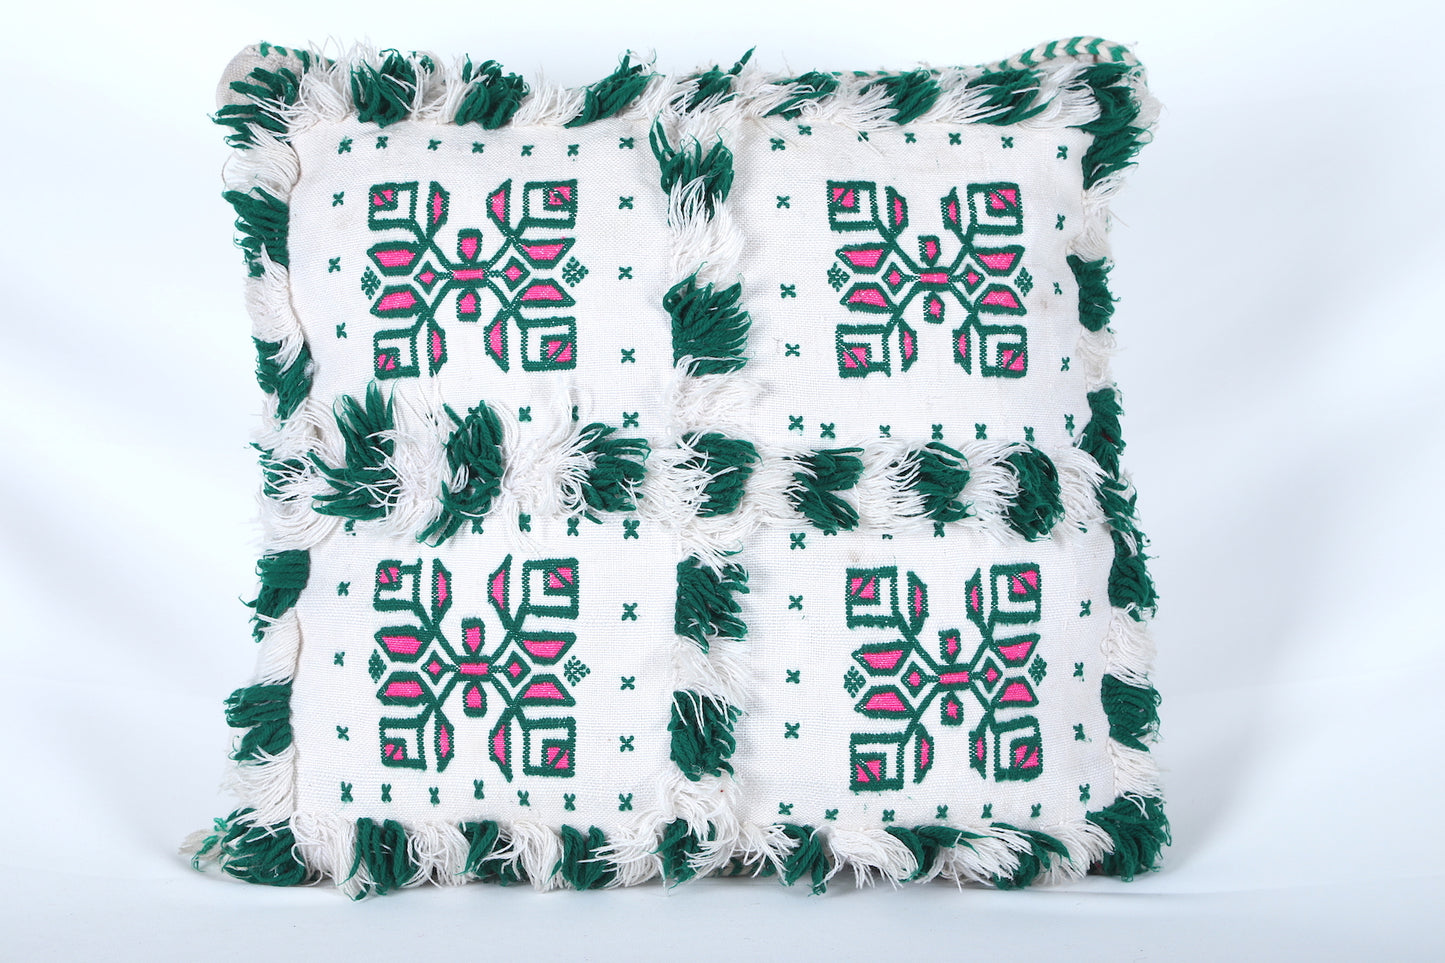 White & Green Moroccan pillow 20.4 INCHES X 20.8 INCHES